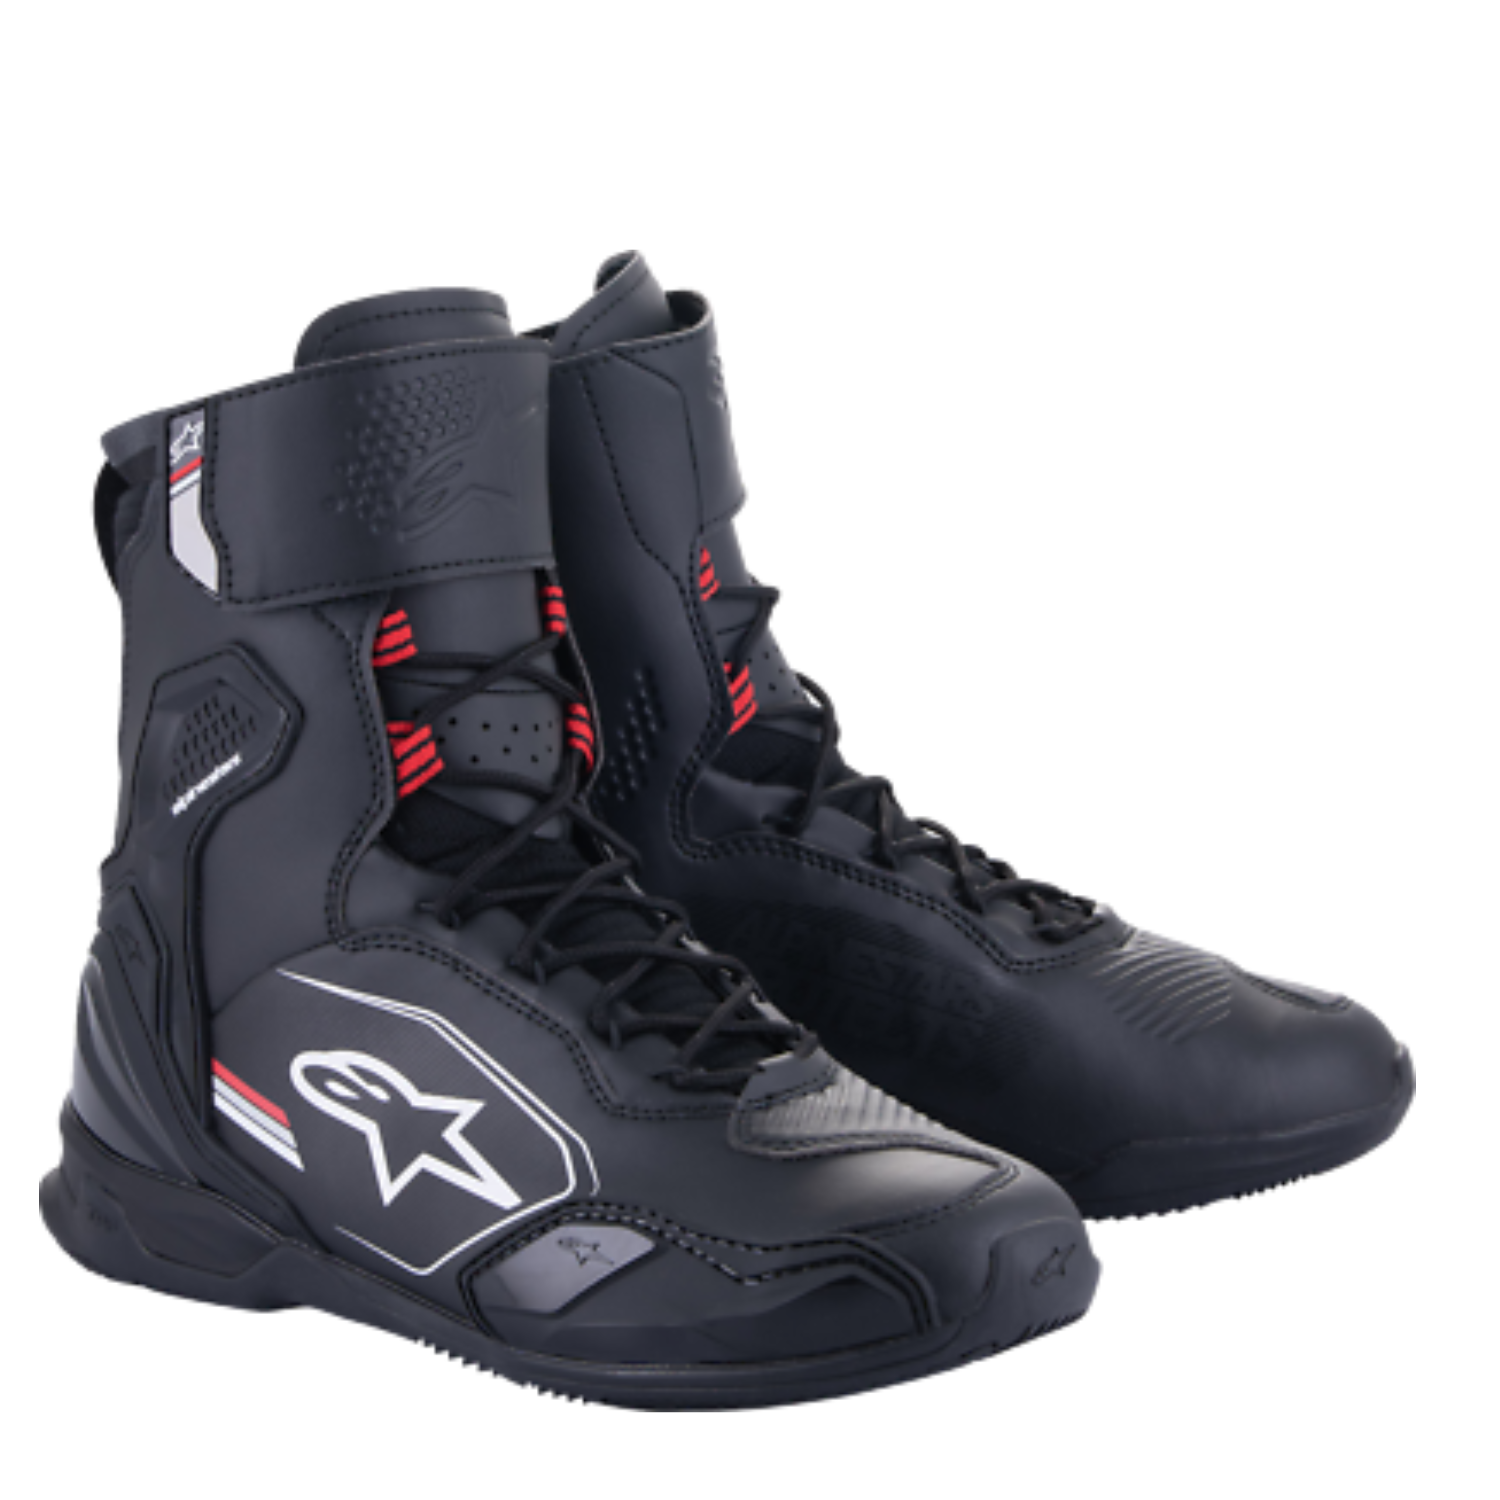 Image of Alpinestars Superfaster Shoes Black Gray Bright Red Size US 65 EN